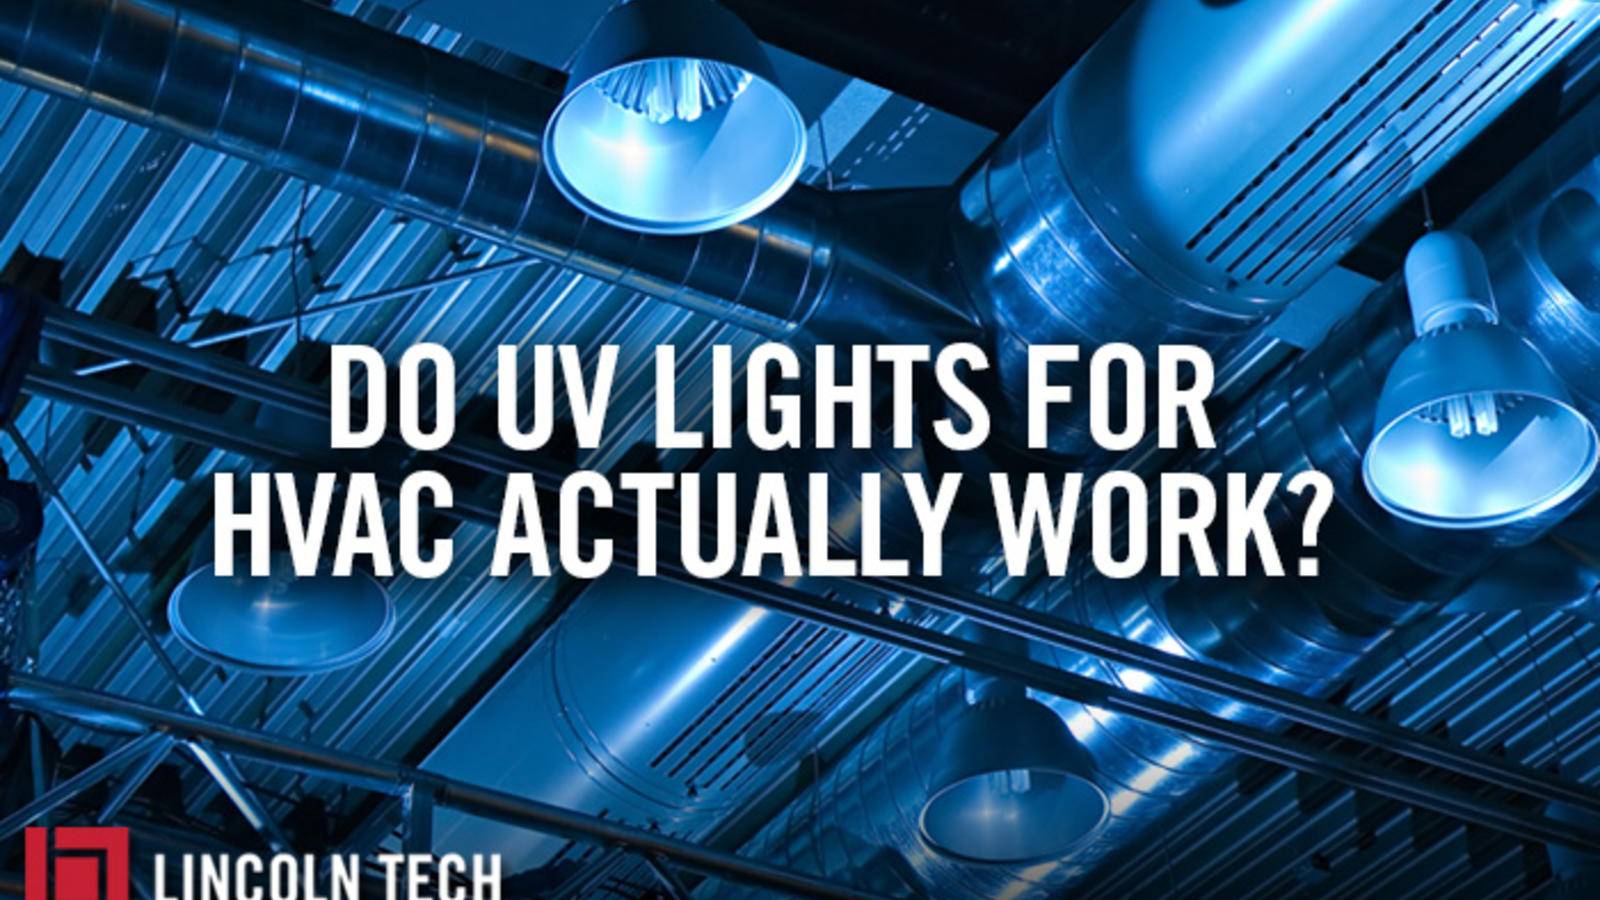 The Pros and Cons Of UV Lights In HVAC - Orzech Heating & Cooling